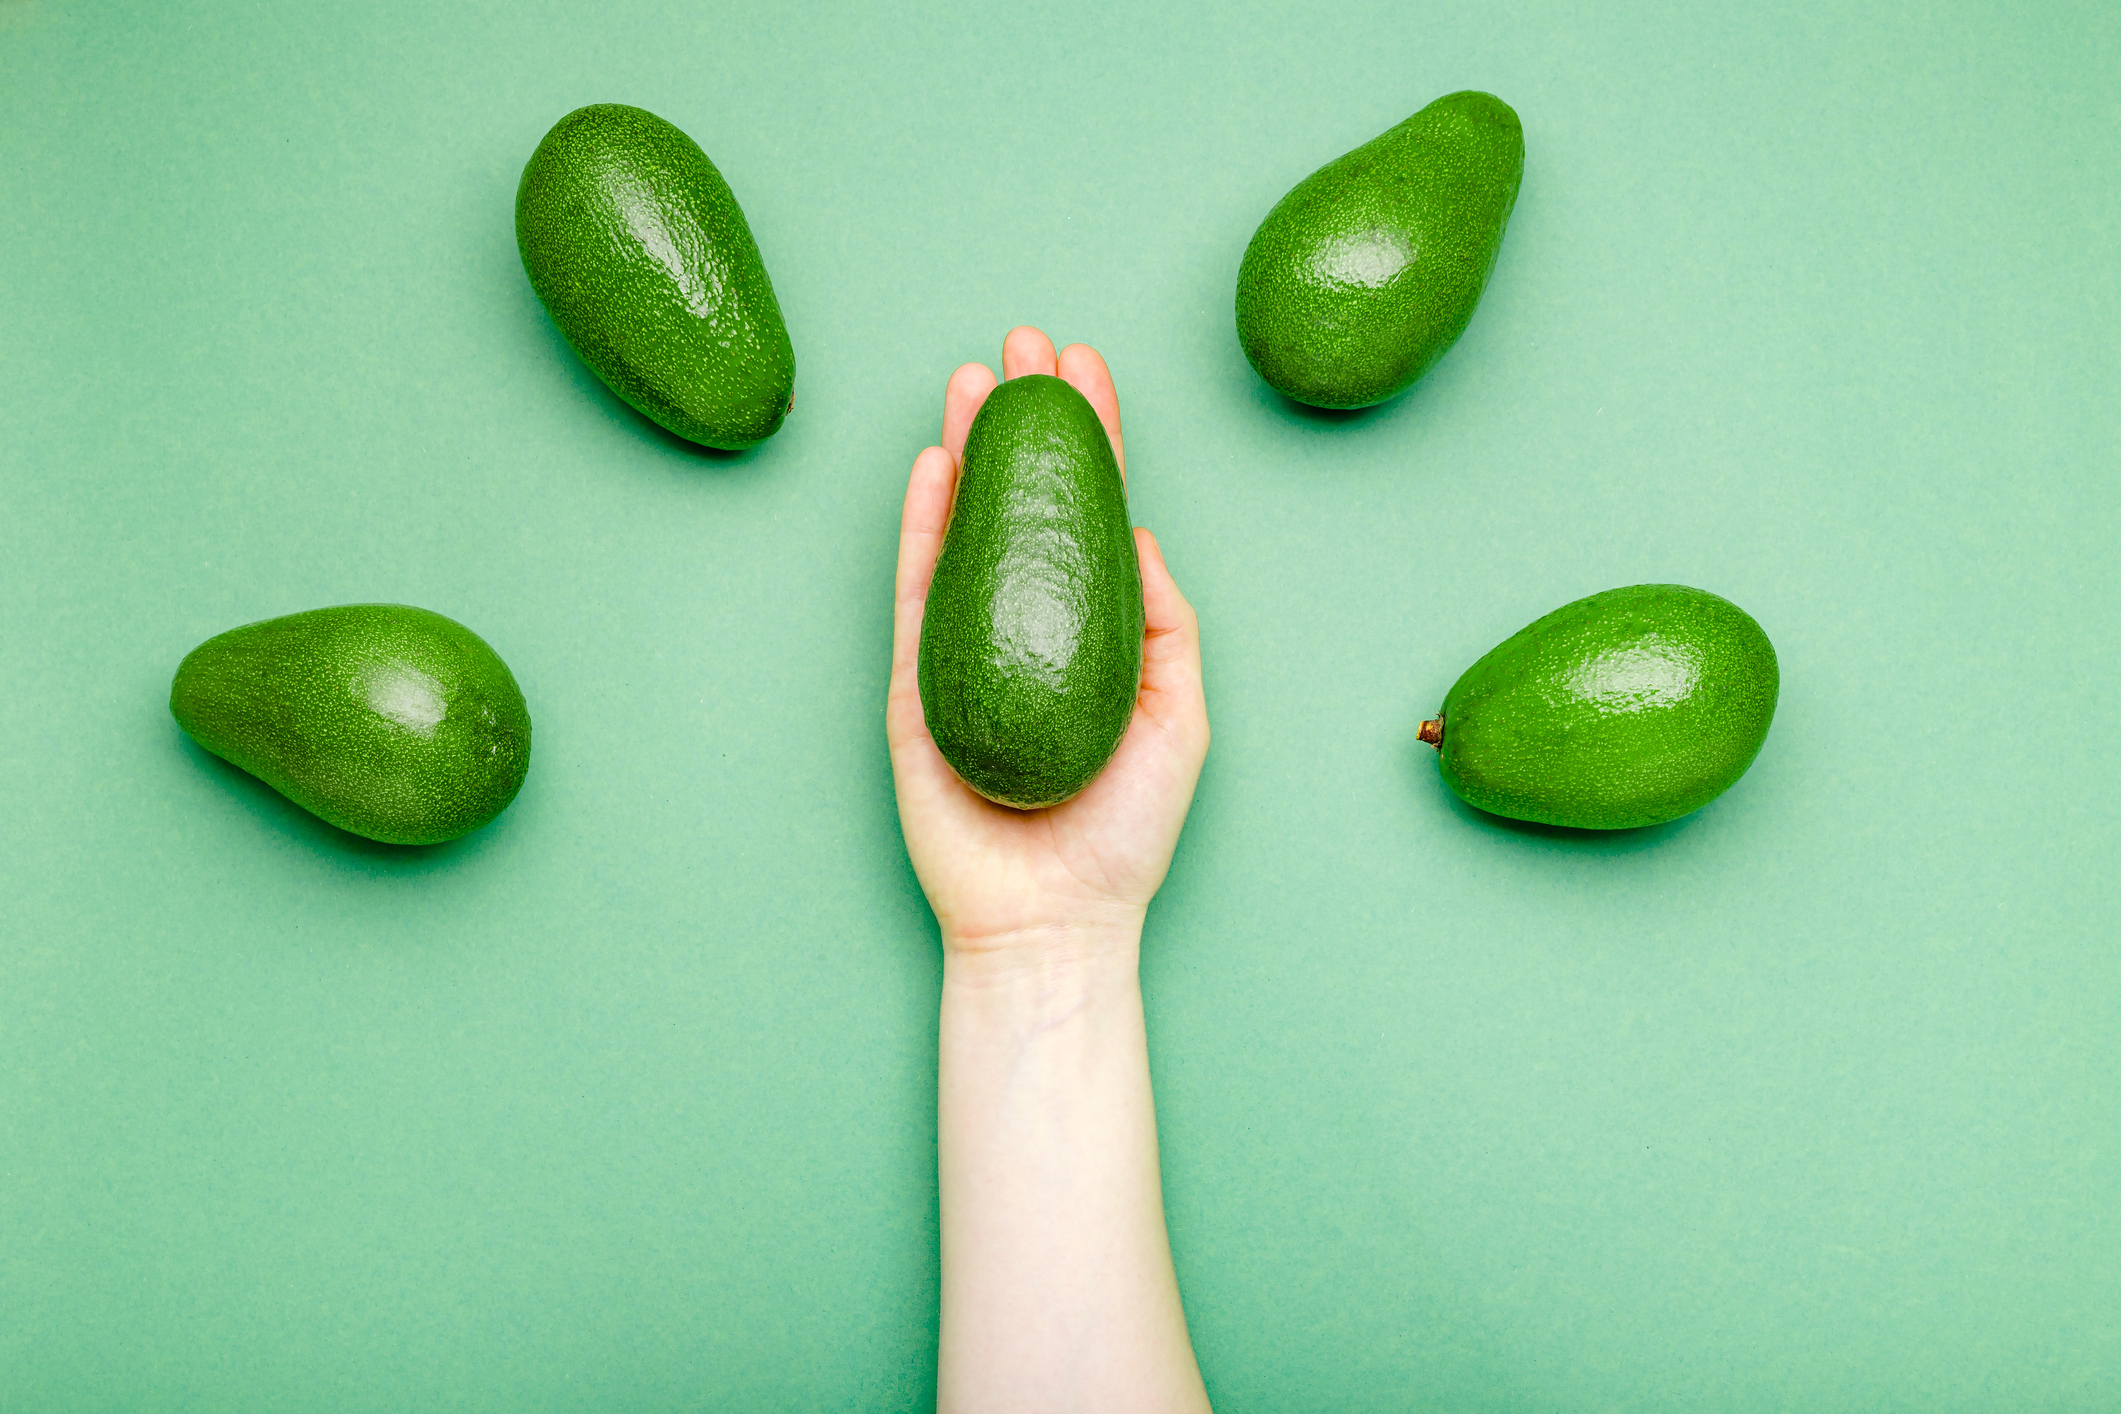 Can an avocado a day really help you lose weight?